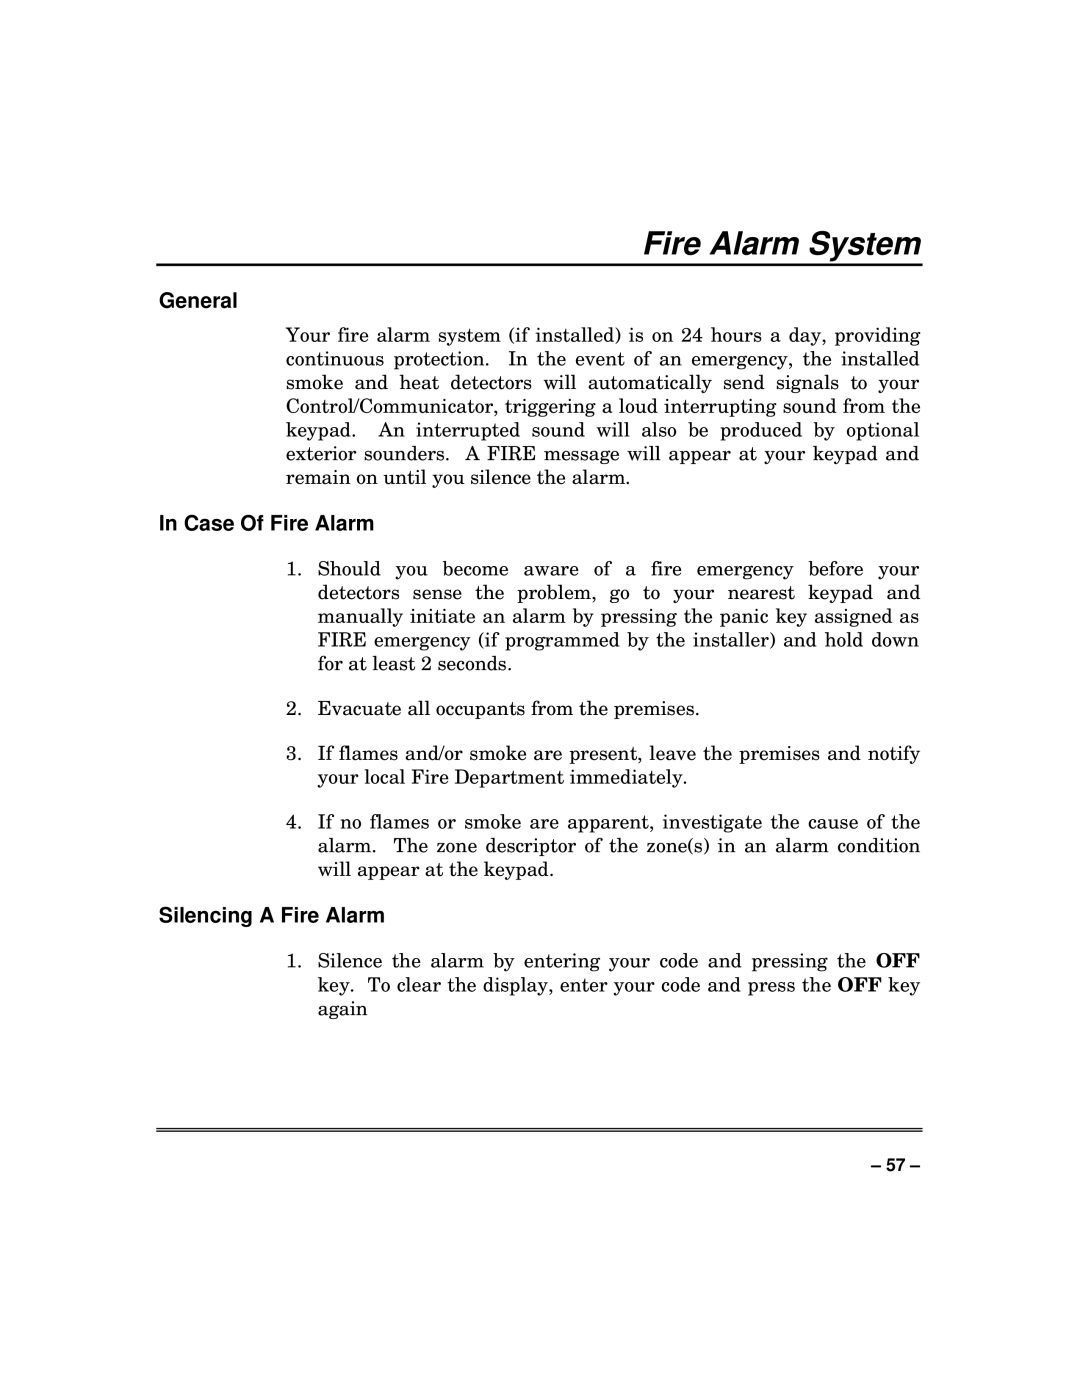 First Alert fire and burglary partitioned security systems with scheduleing manual Fire Alarm System, In Case Of Fire Alarm 